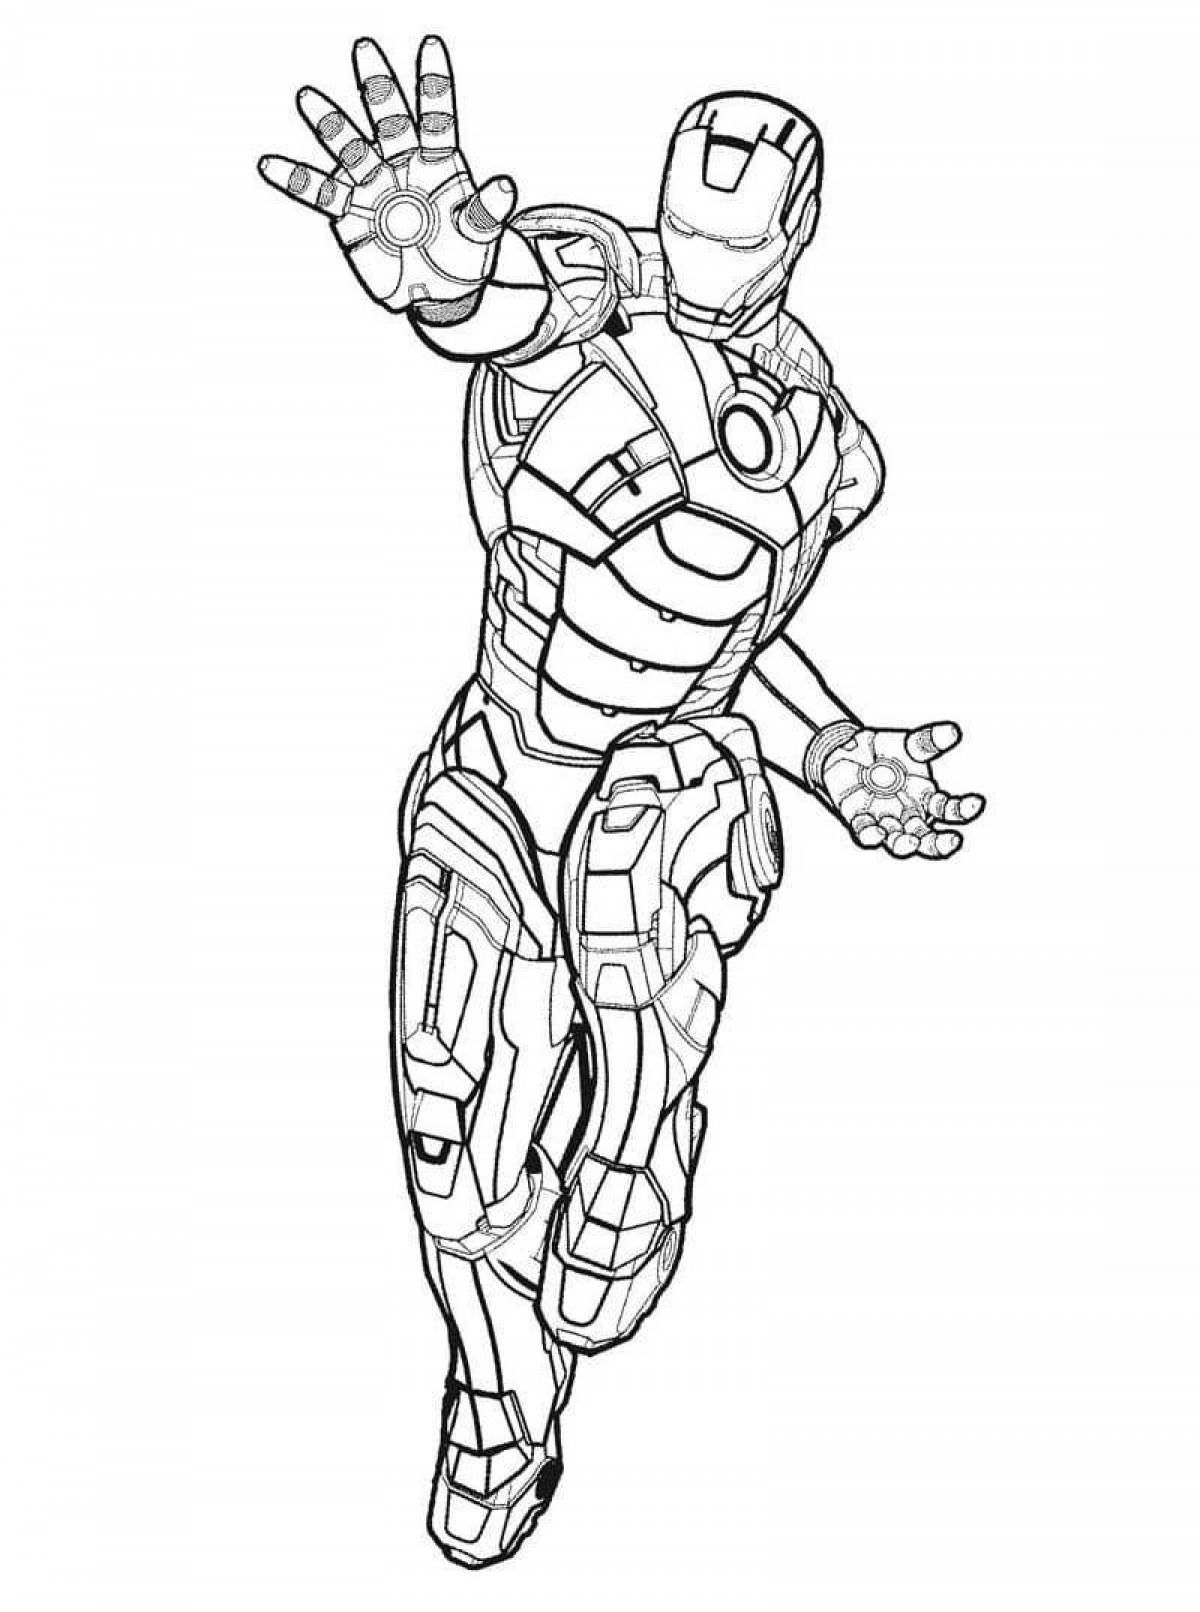 Jolly iron man coloring pages for kids